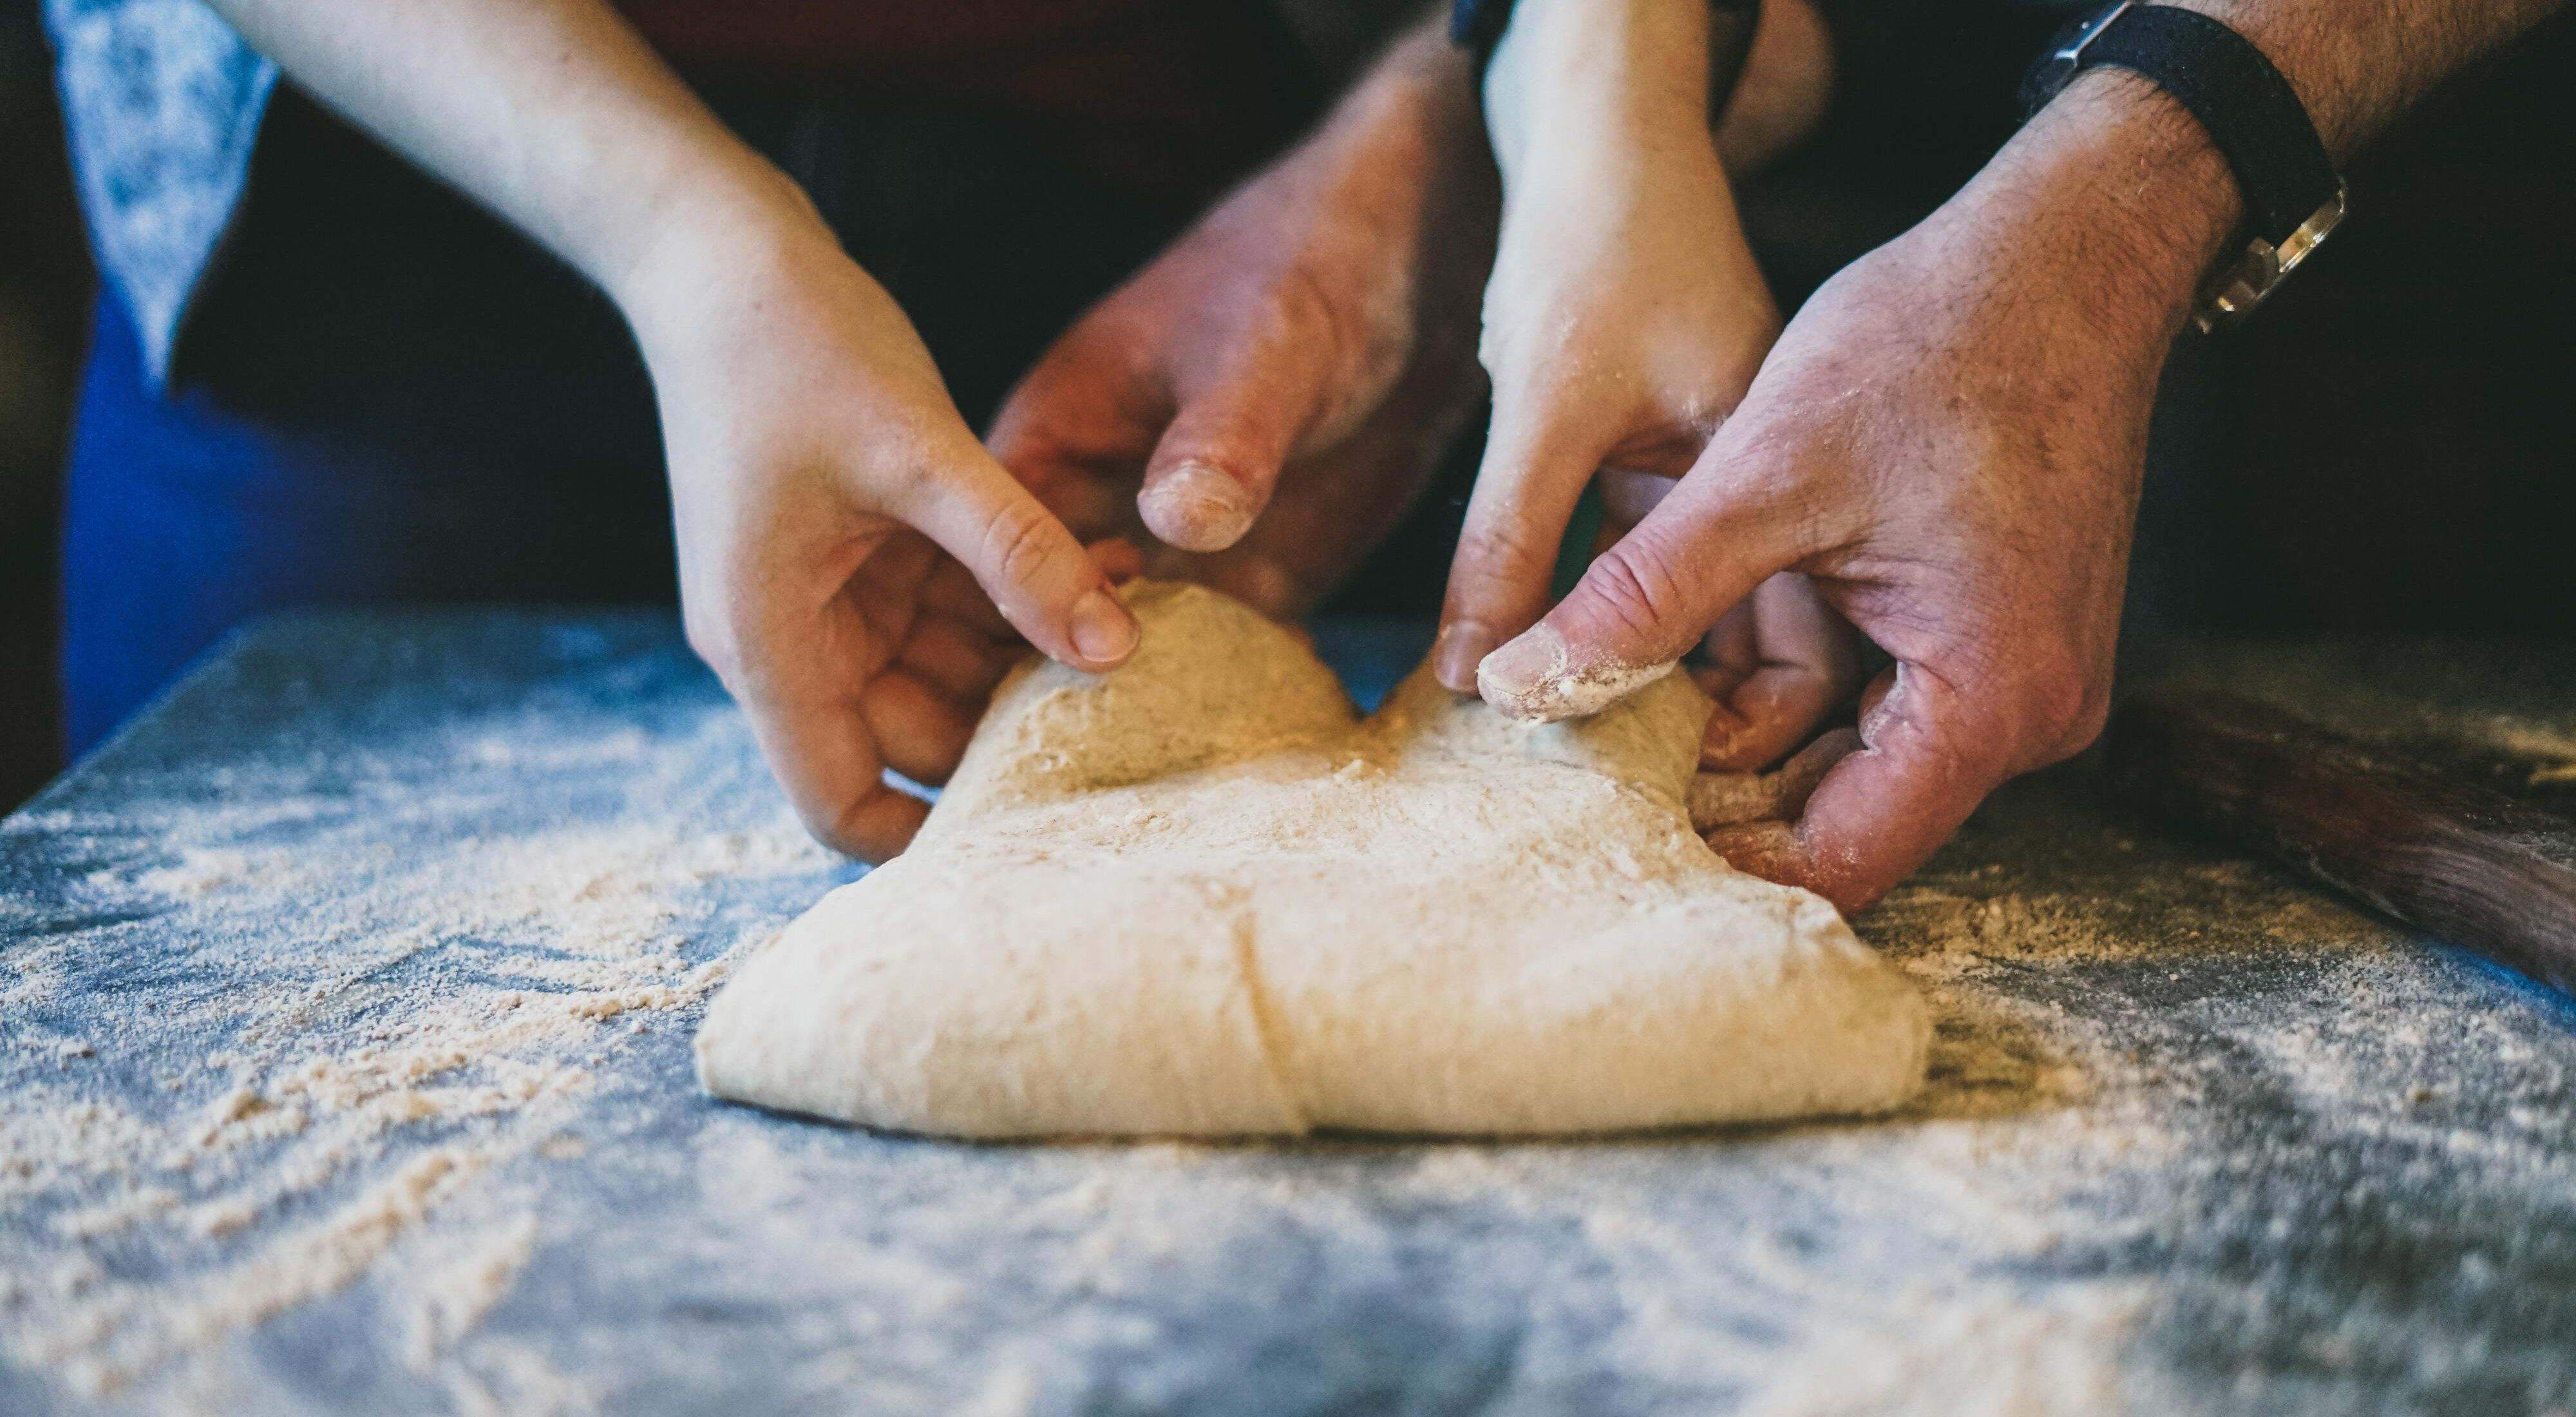 Two sets of hands kneading bread dough on a floured surface.